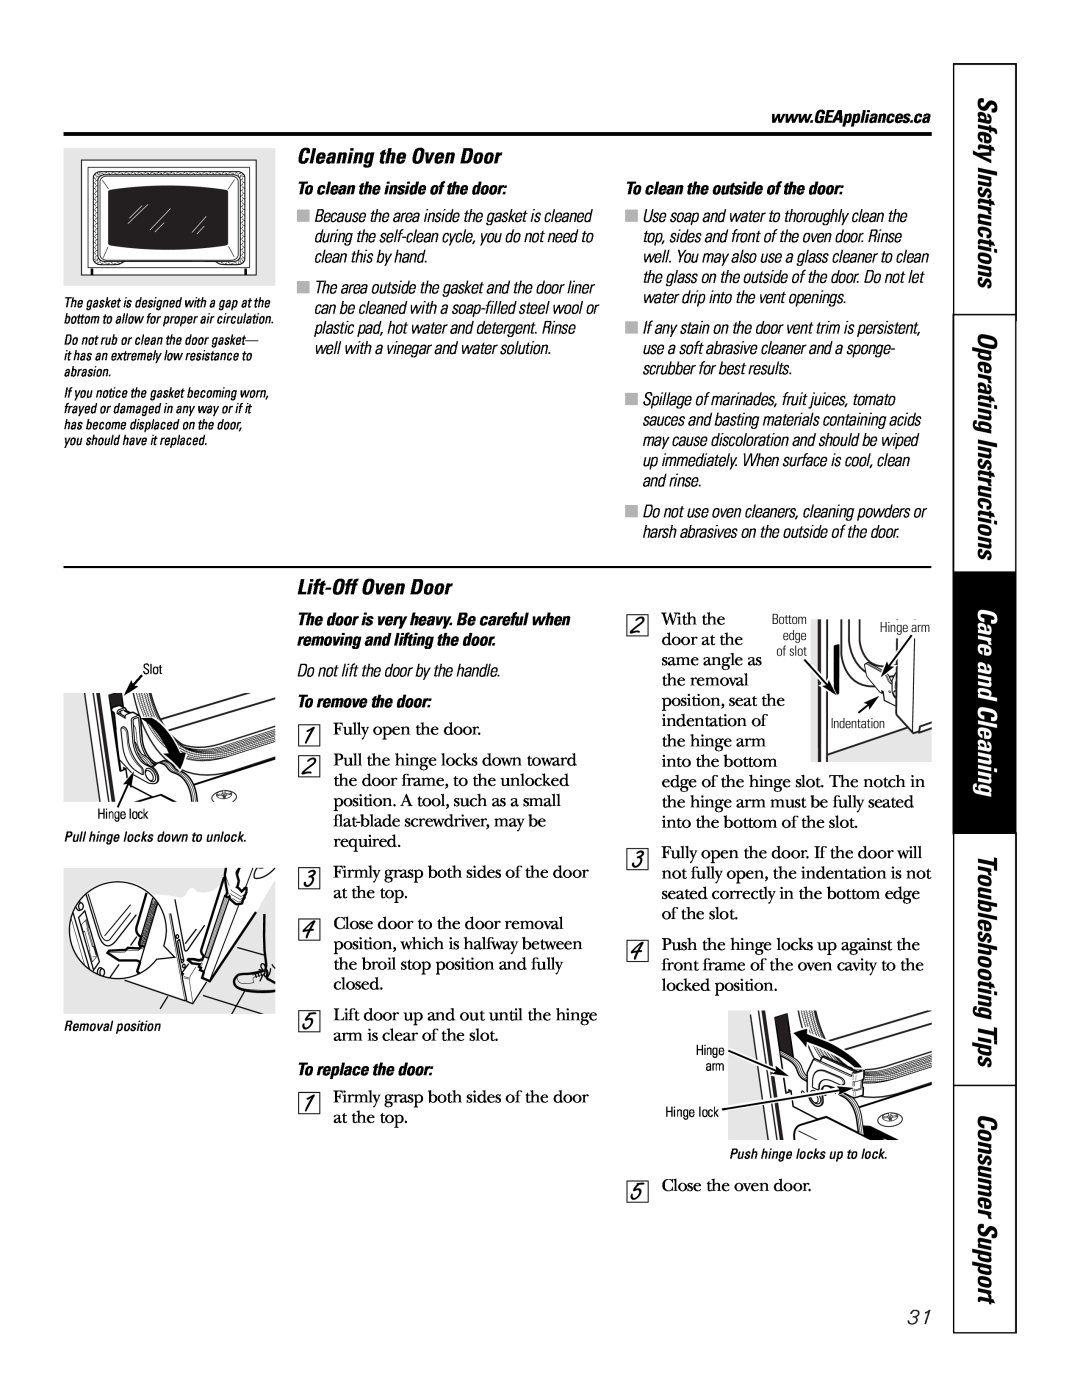 GE JCB905, JCB968 Care and Cleaning Troubleshooting Tips, Instructions Operating Instructions, Cleaning the Oven Door 